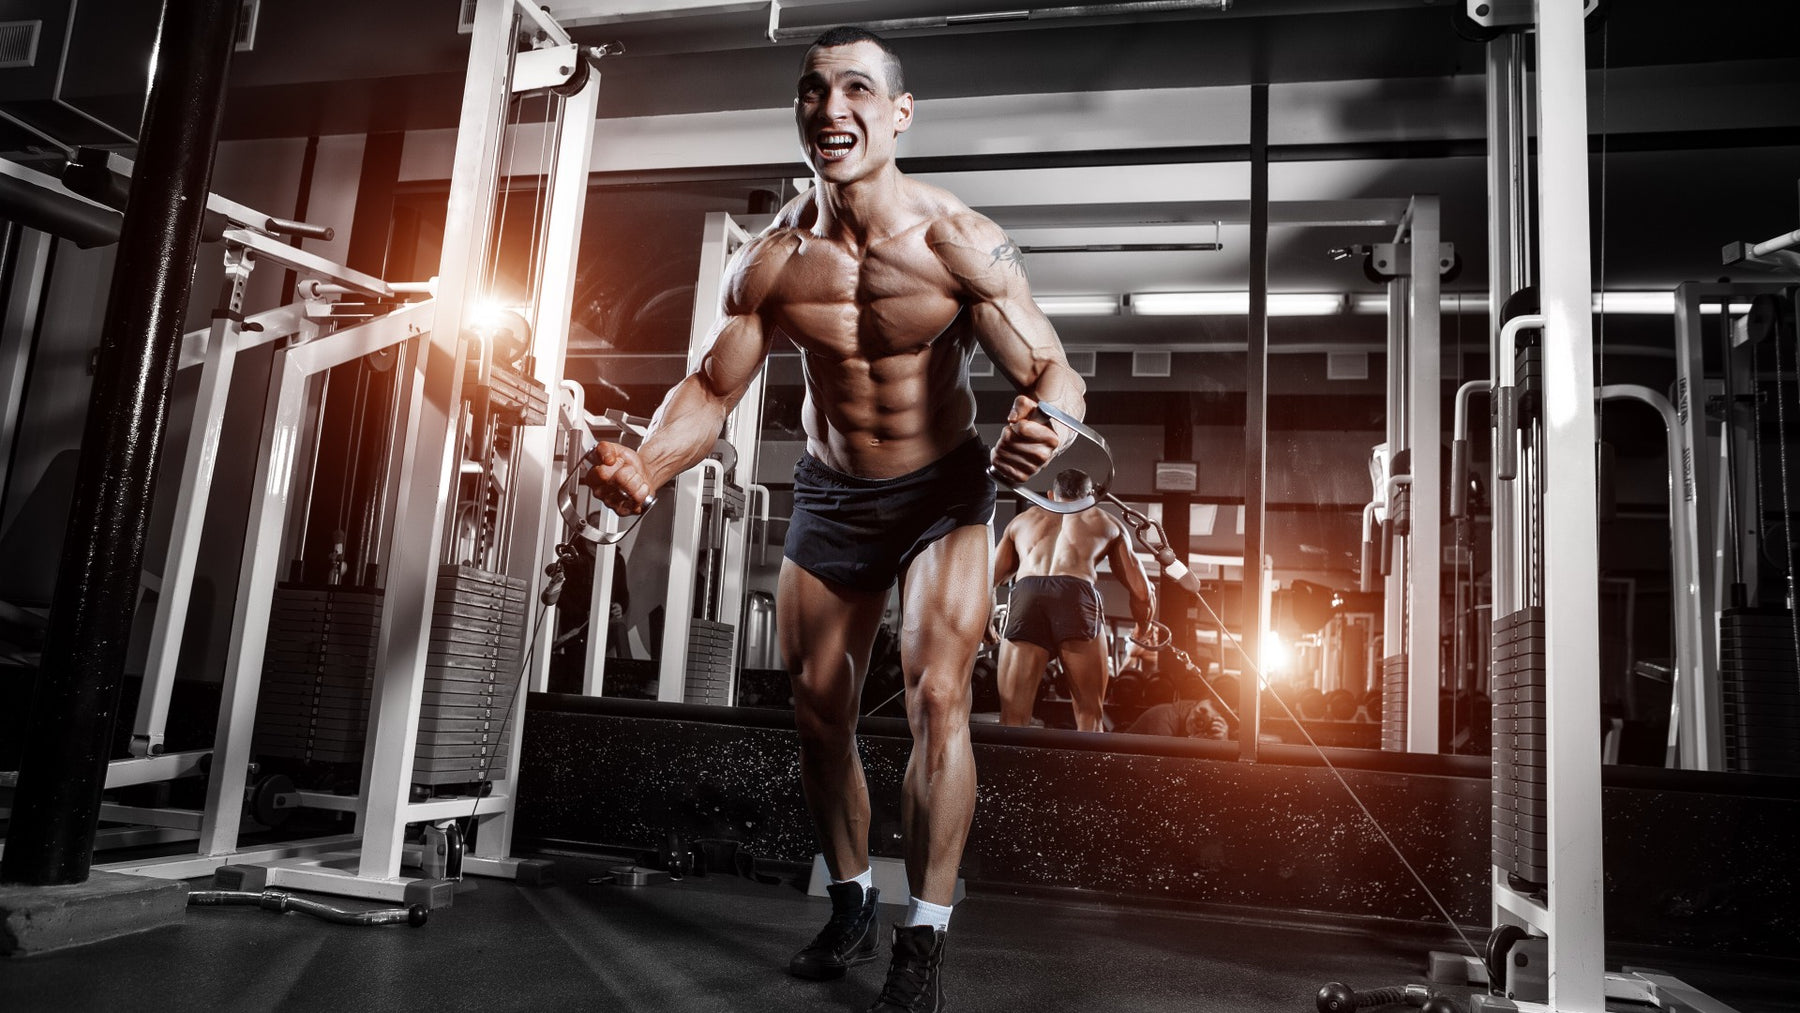 Pre-Exhaust Training - Power Up Your Muscle Building Efforts